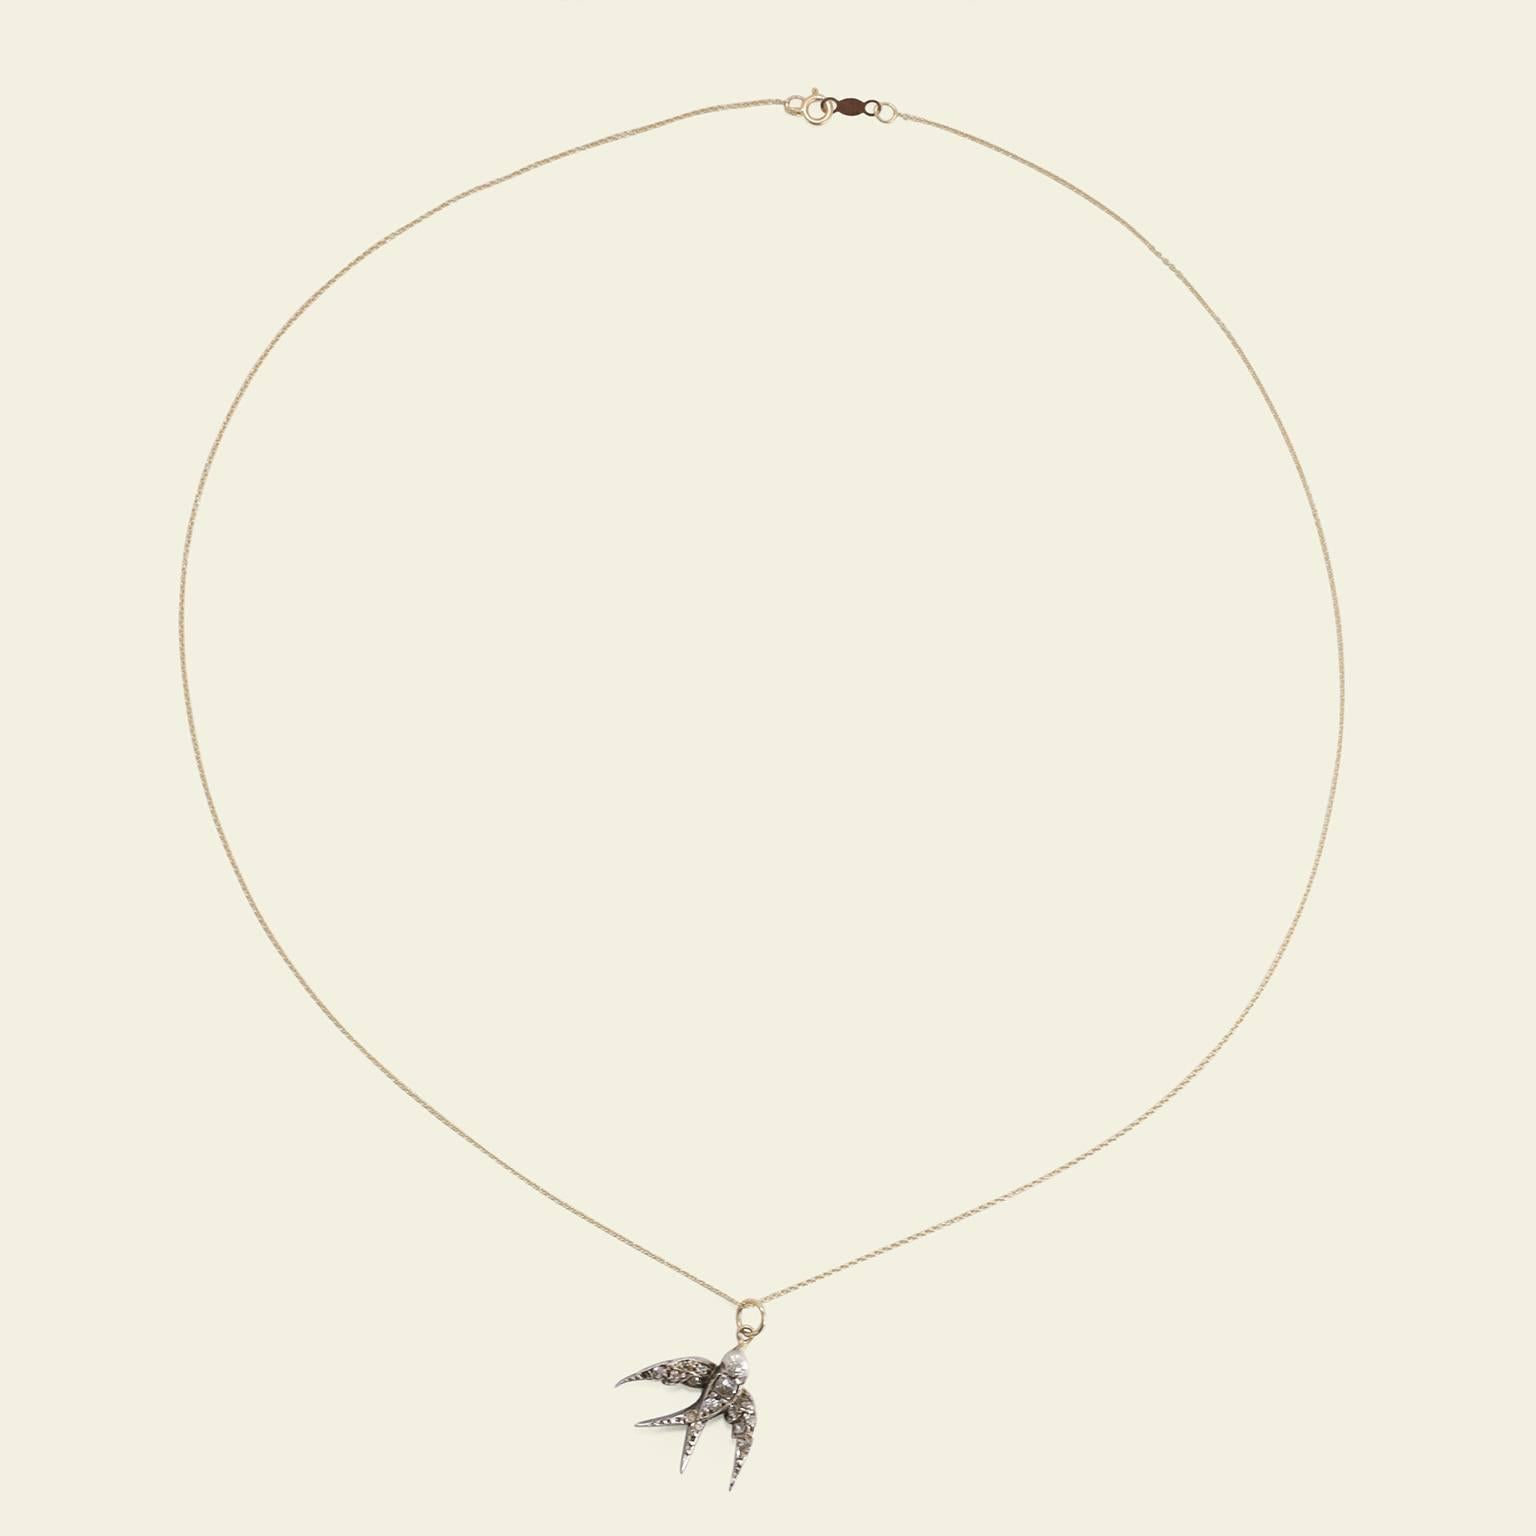 The migration of the swallow is one of the early signs of spring in the northern hemisphere. The lore surrounding the return of this seasonal bird centers around love, luck, and abundance. This Victorian swallow pendant is fashioned in 15k rose gold